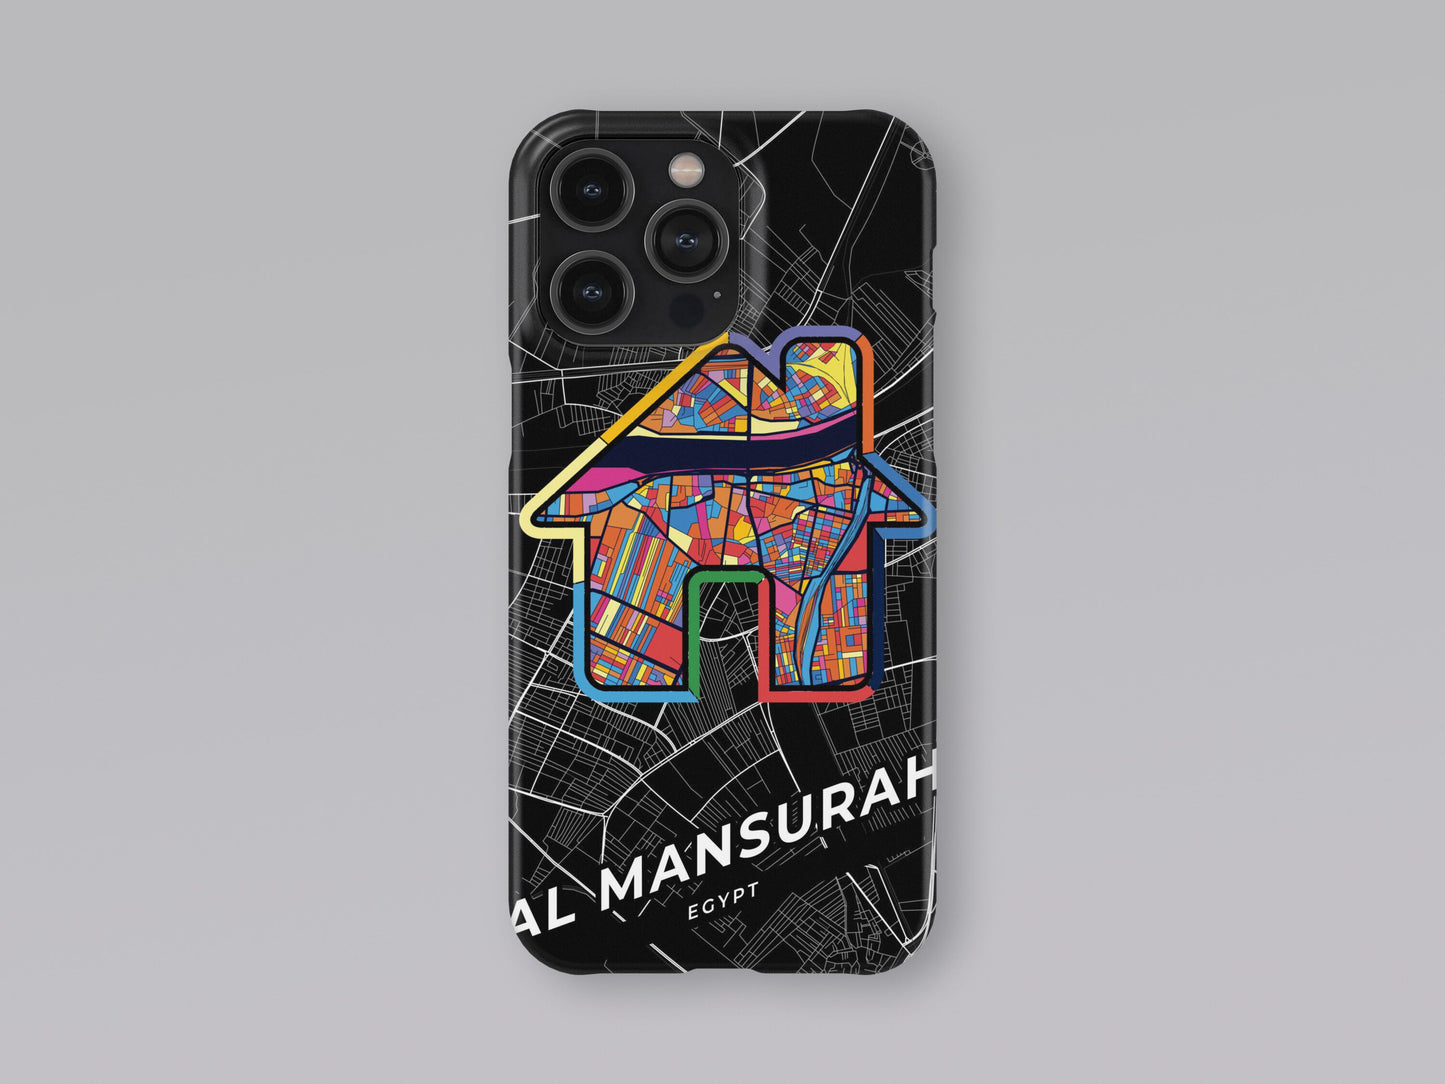 Al Mansurah Egypt slim phone case with colorful icon. Birthday, wedding or housewarming gift. Couple match cases. 3